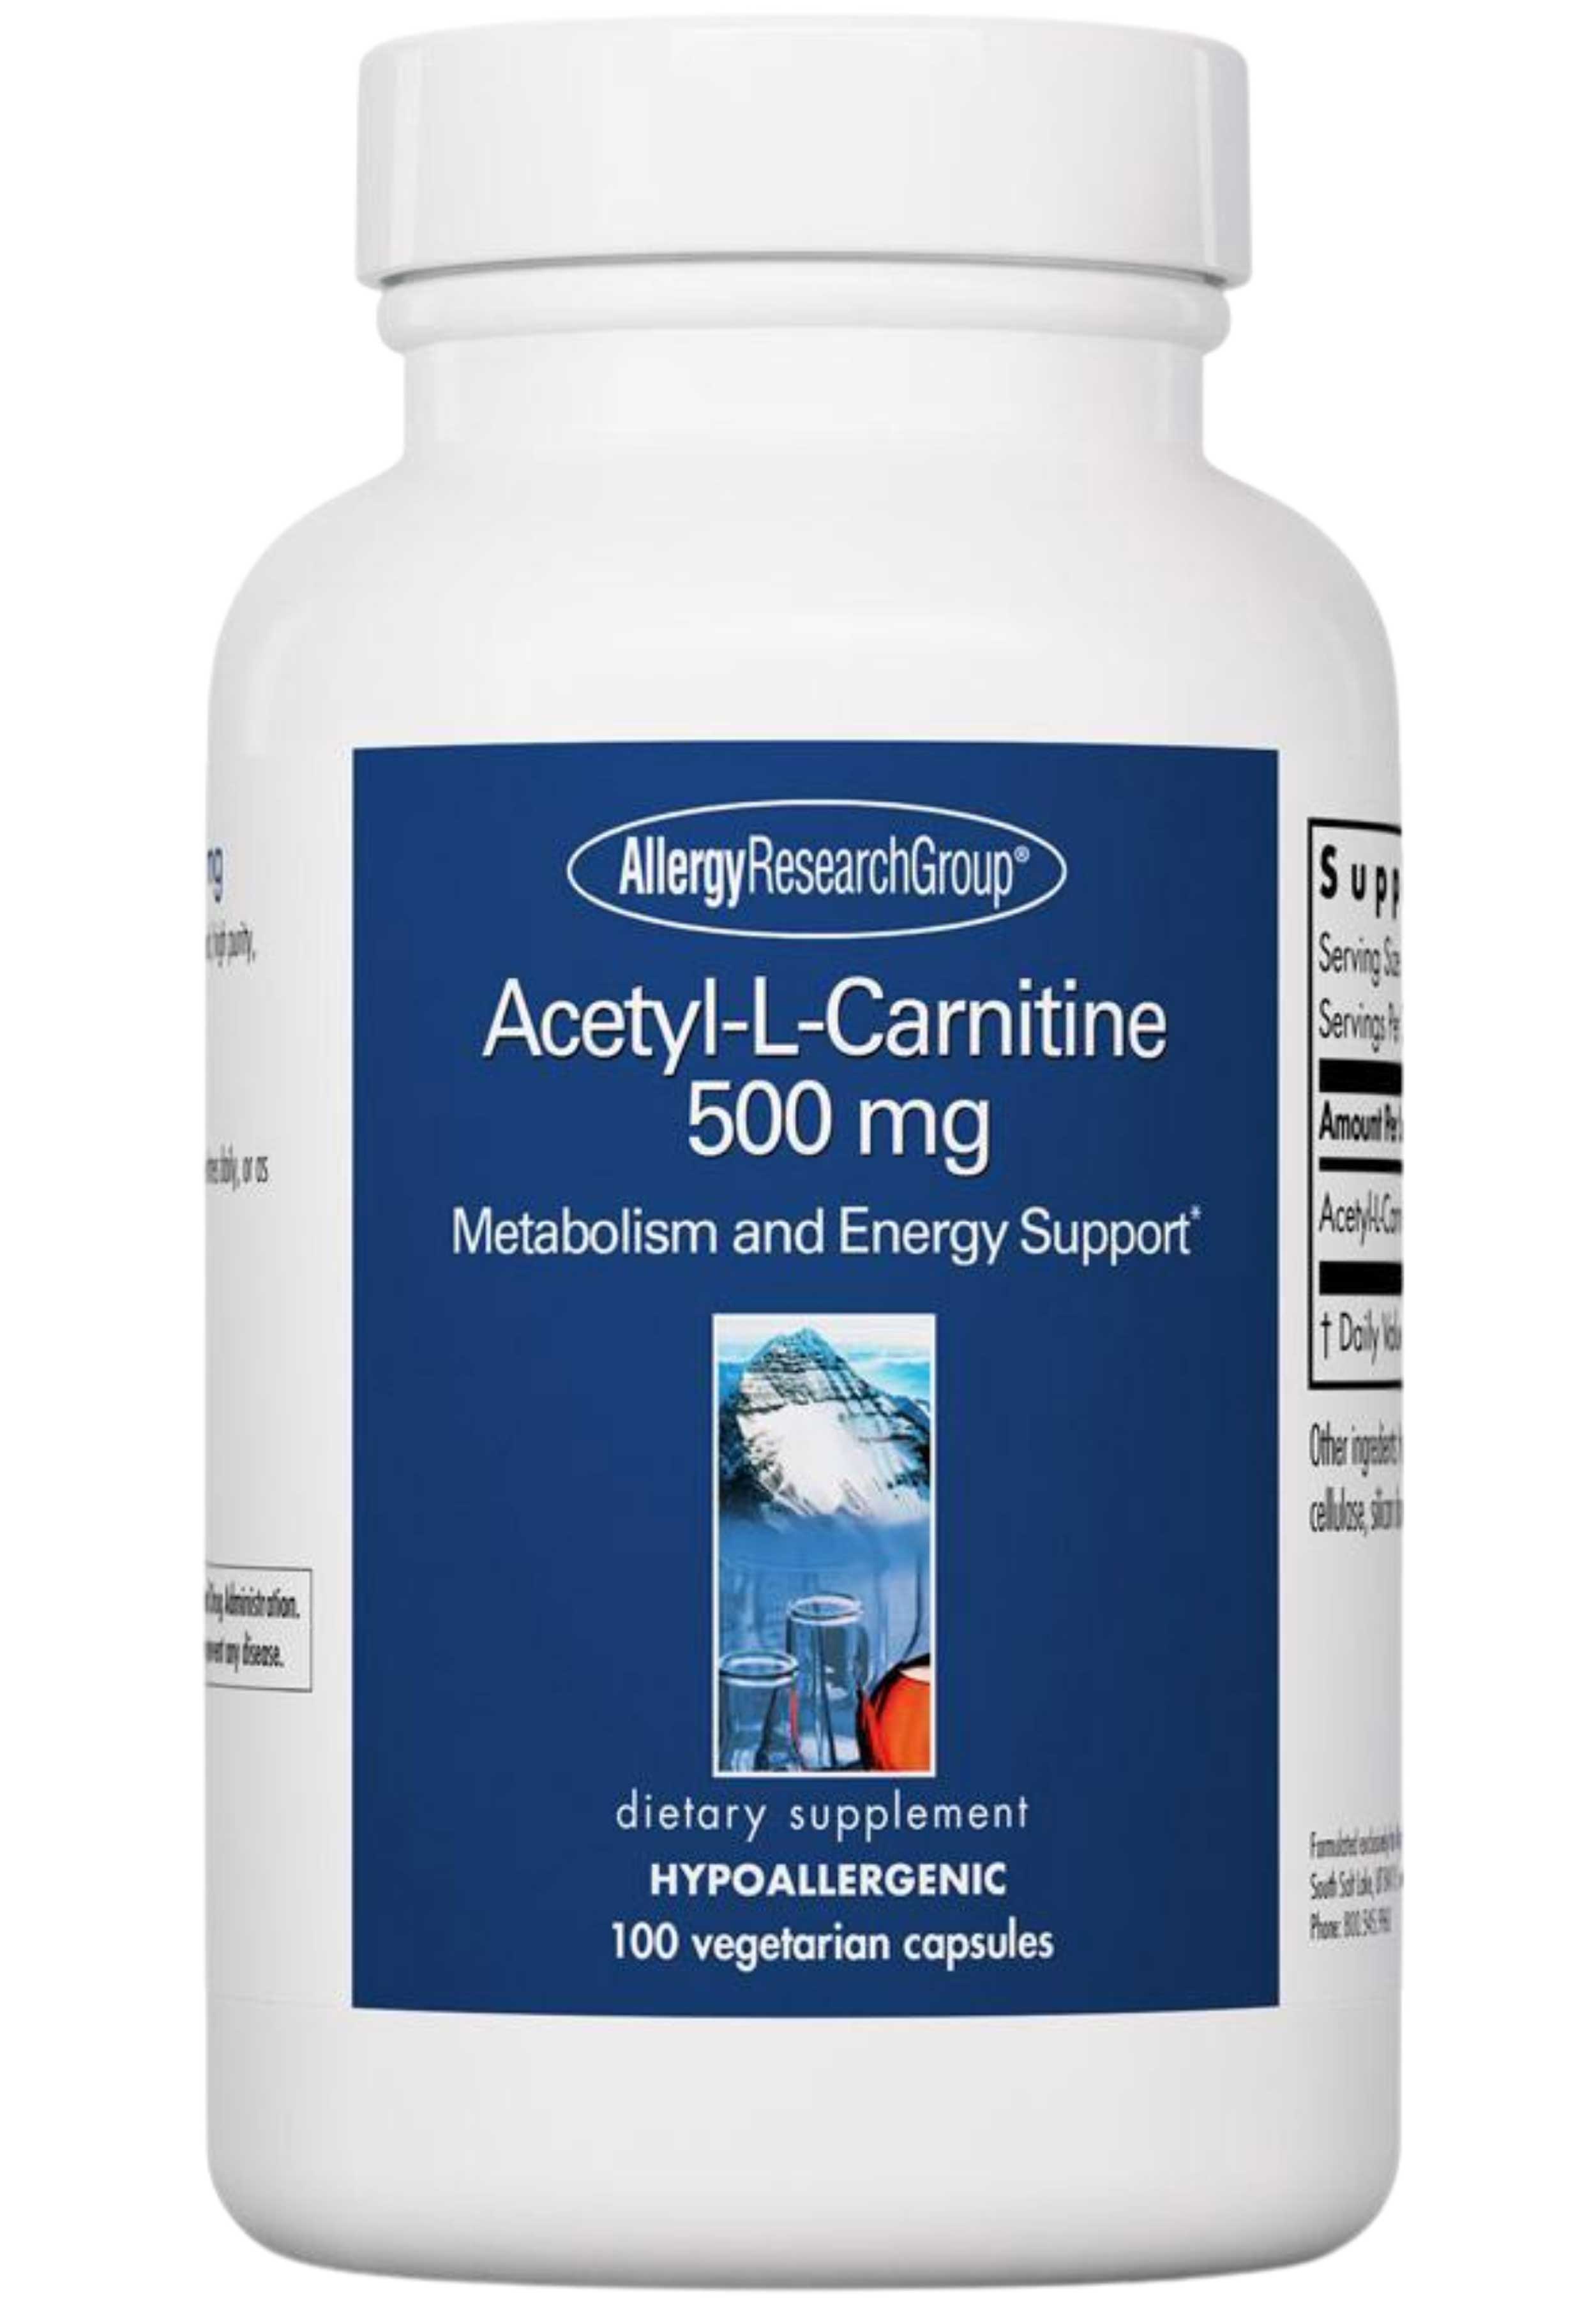 Allergy Research Group Acetyl-L-Carnitine 500 mg